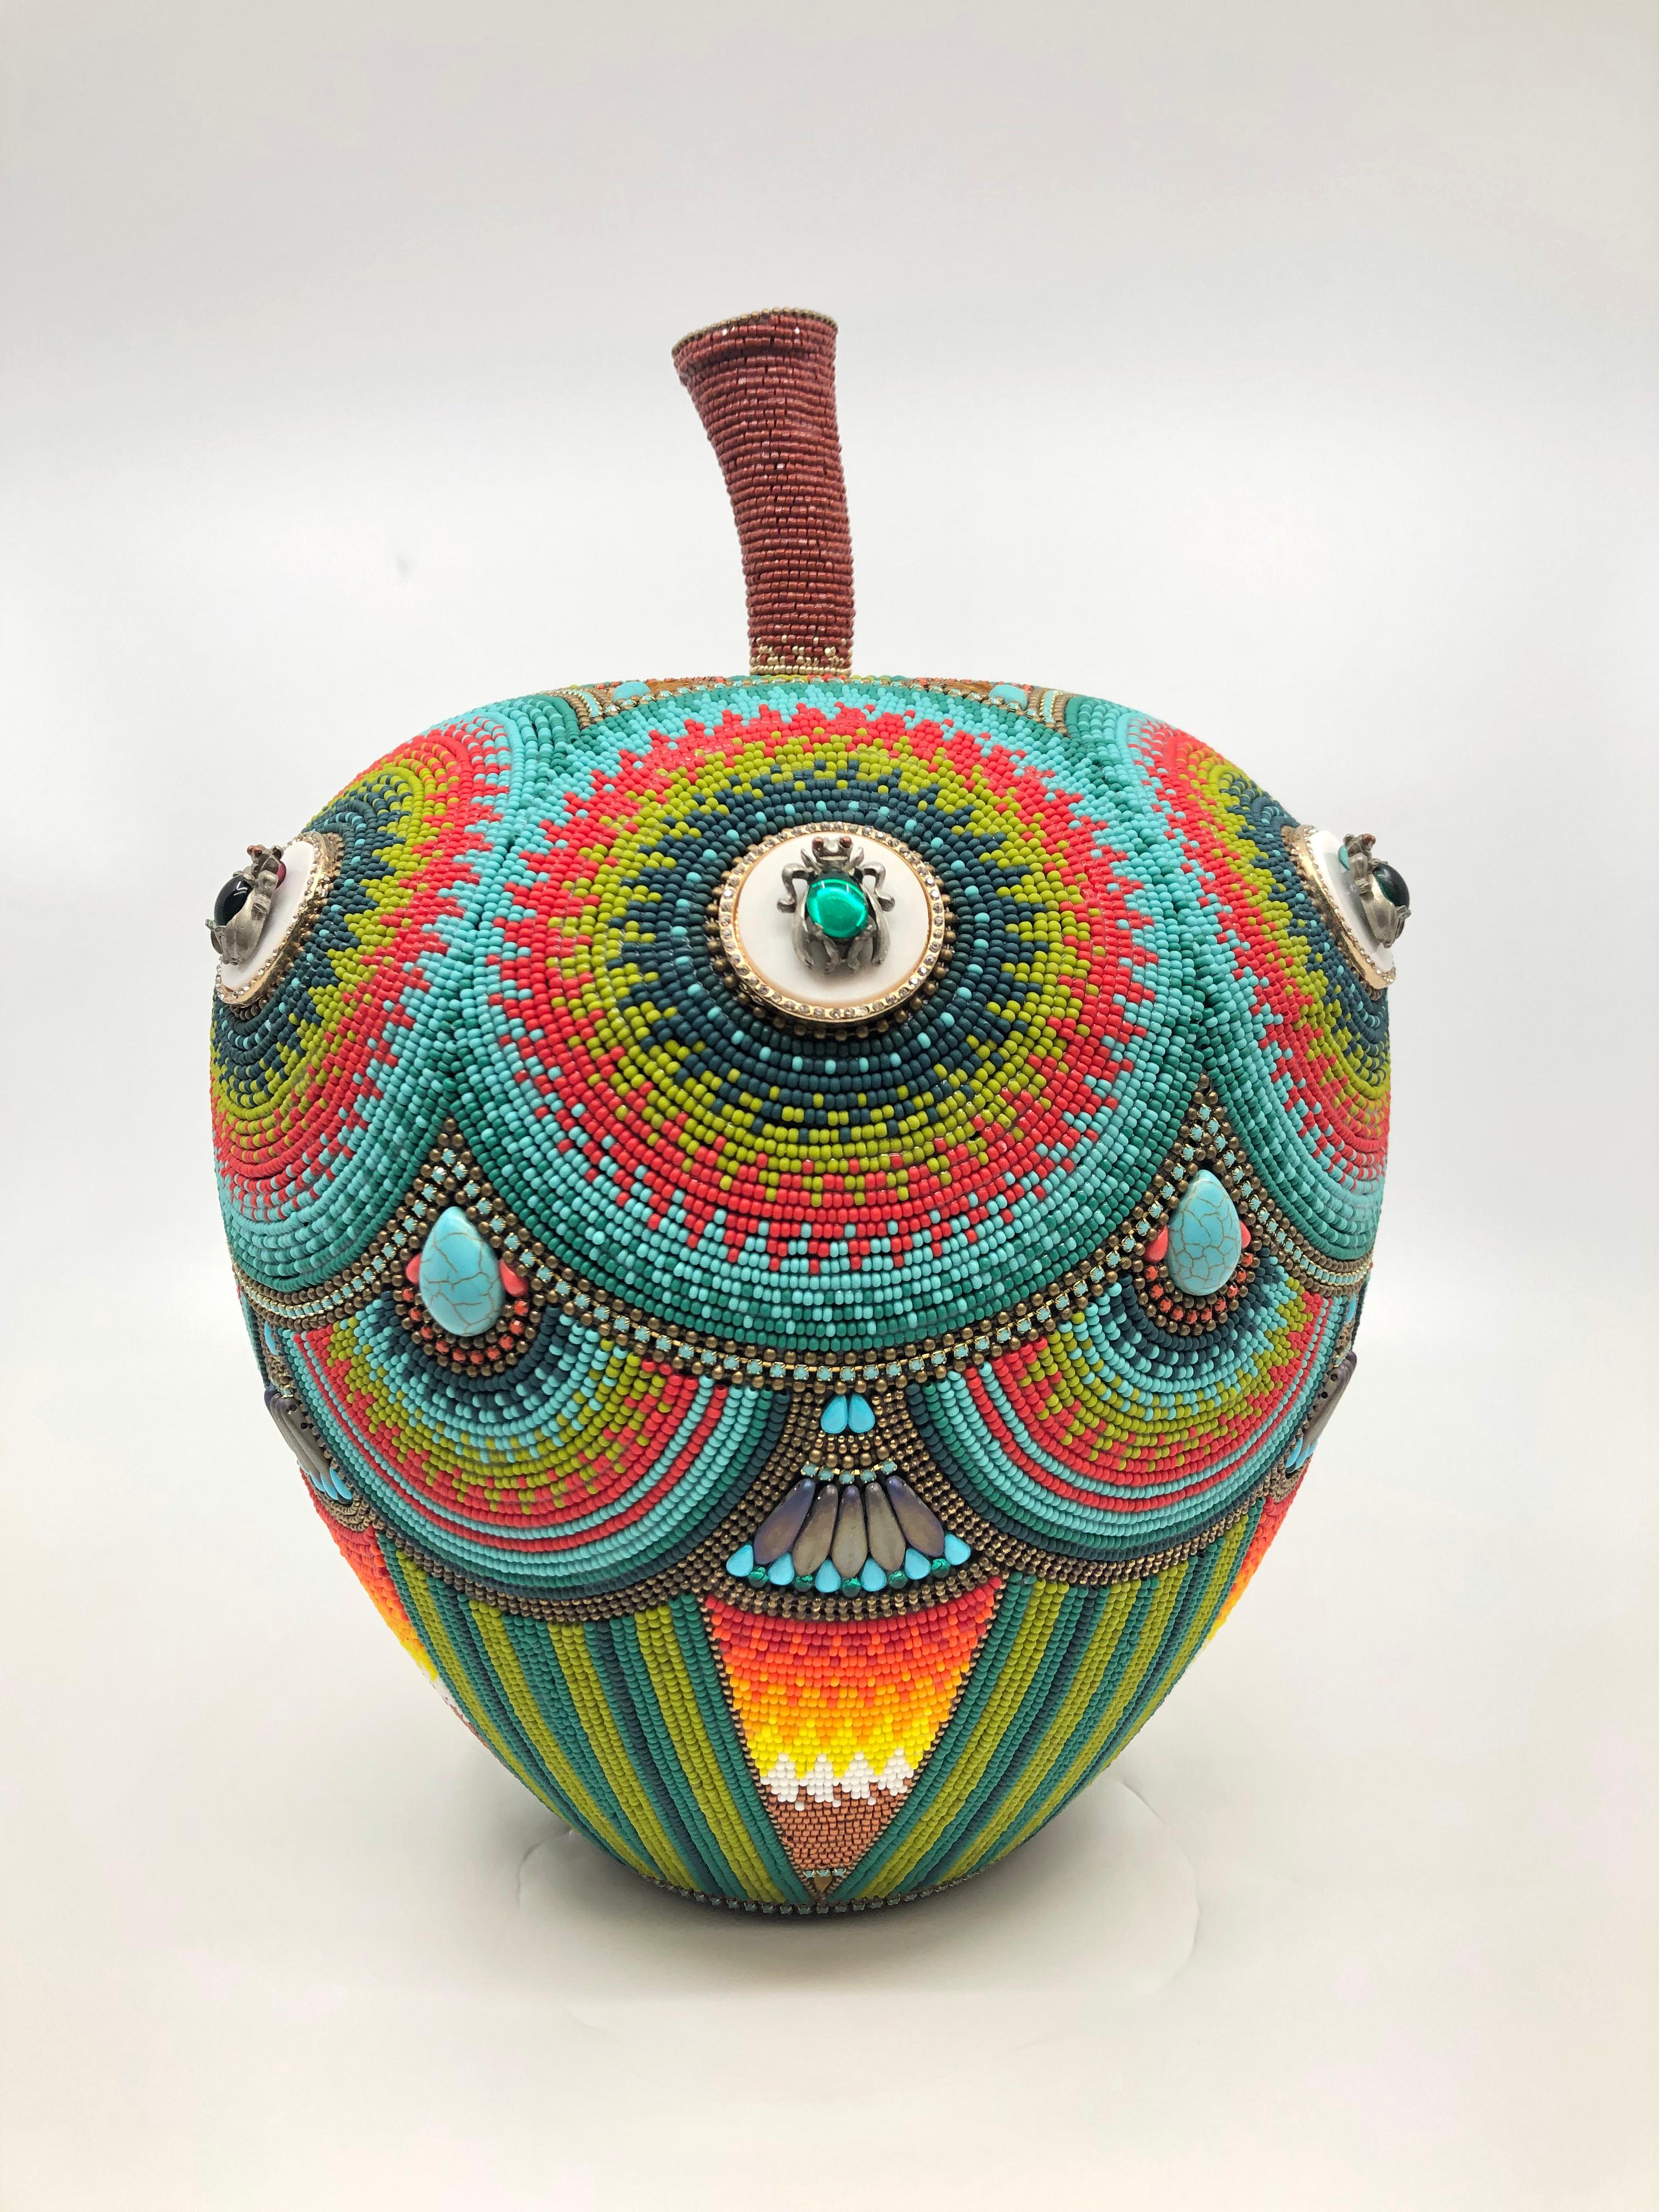 "Apple", Contemporary, Mixed Media, Beaded, Sculpture, Fruit, Colorful, Pattern